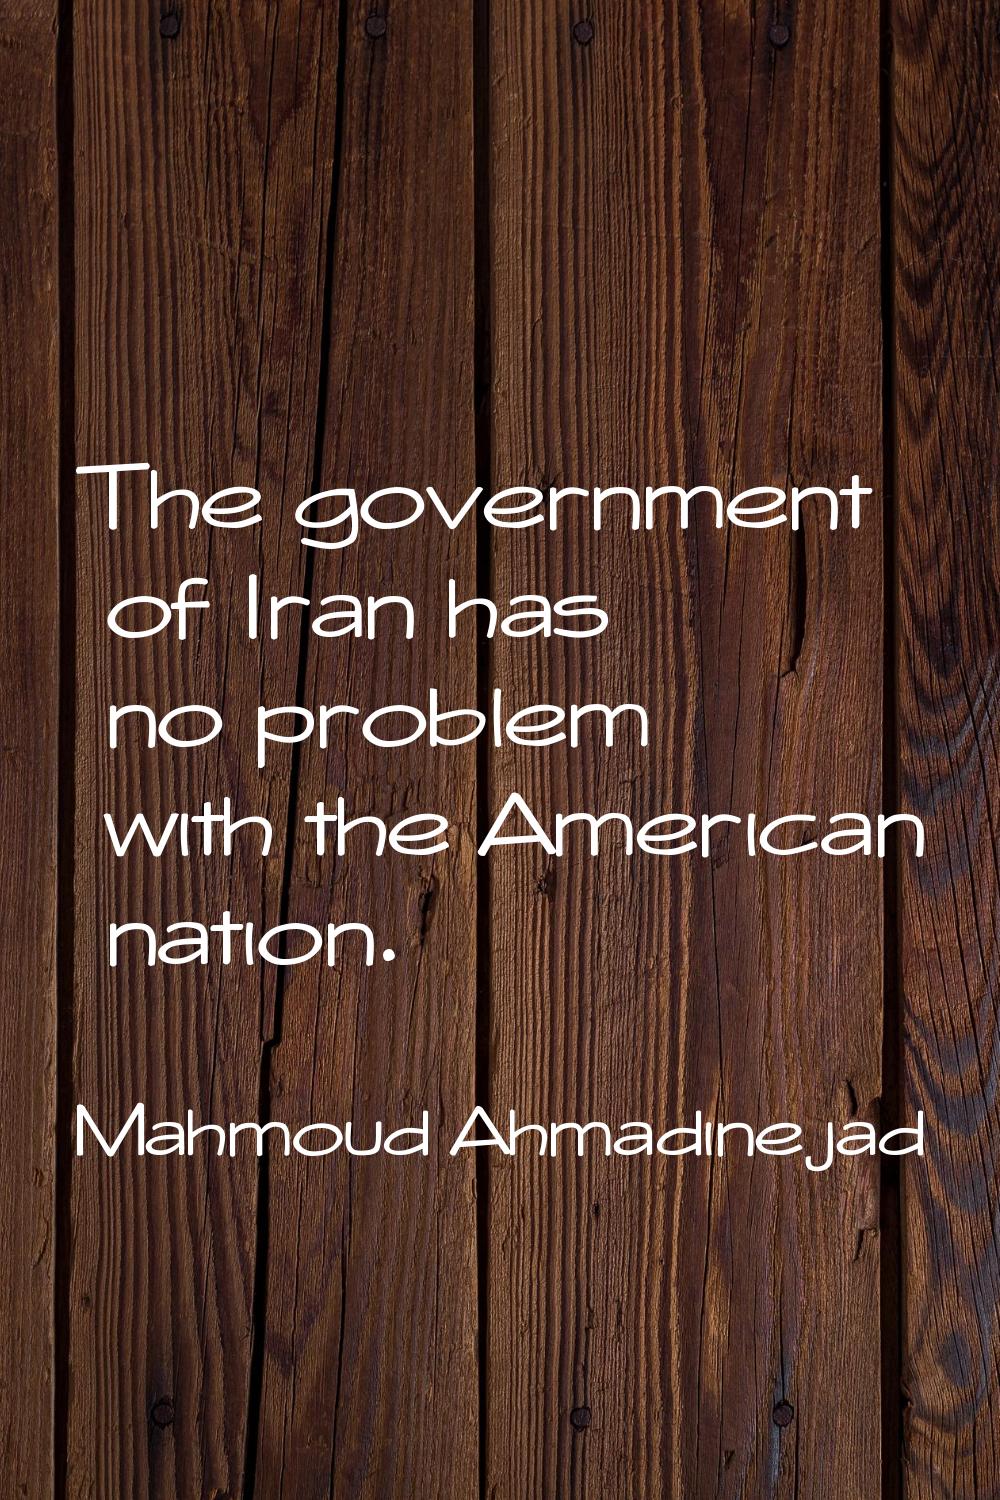 The government of Iran has no problem with the American nation.